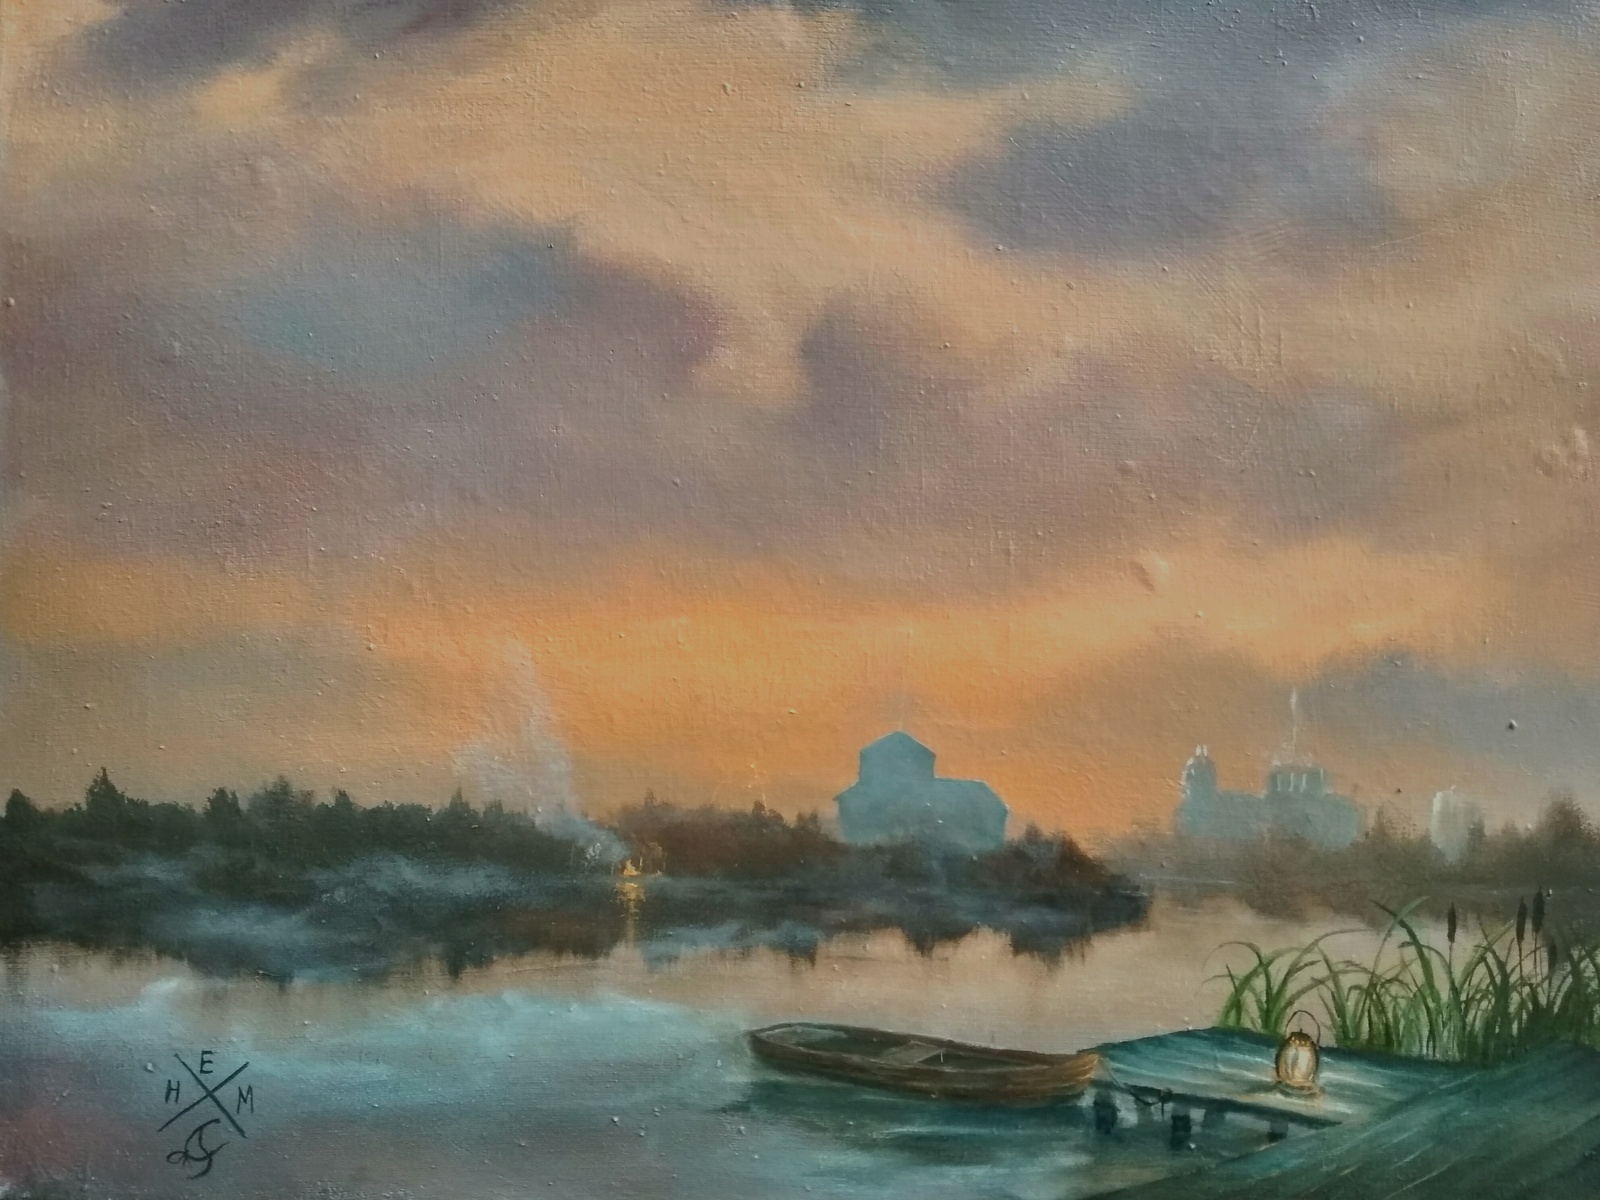 Evening. Canvas. Oil 30X40 - My, Oil painting, Self-taught, River, A boat, Evening, Landscape